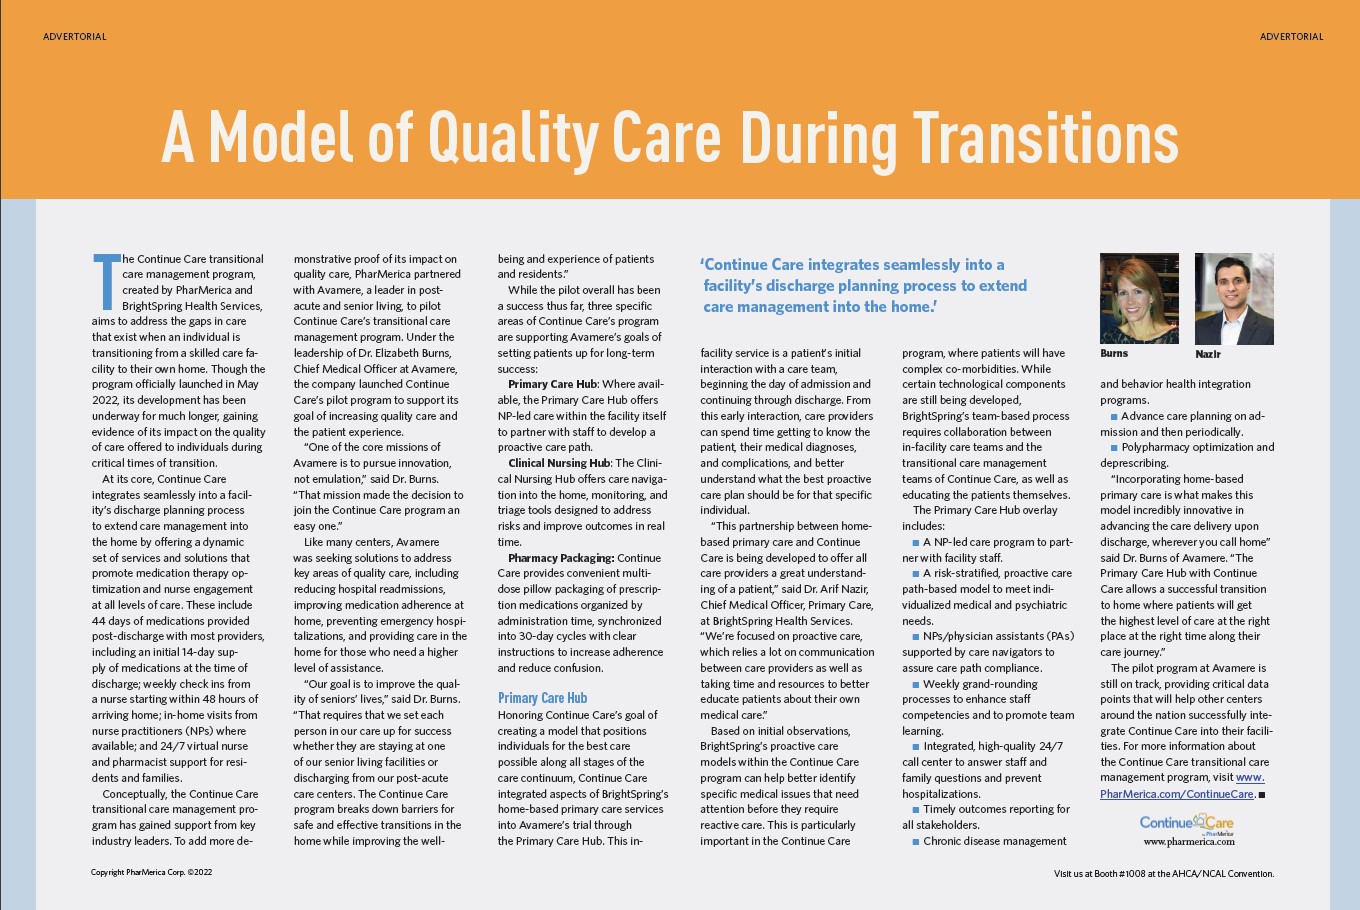 Model of Quality Care